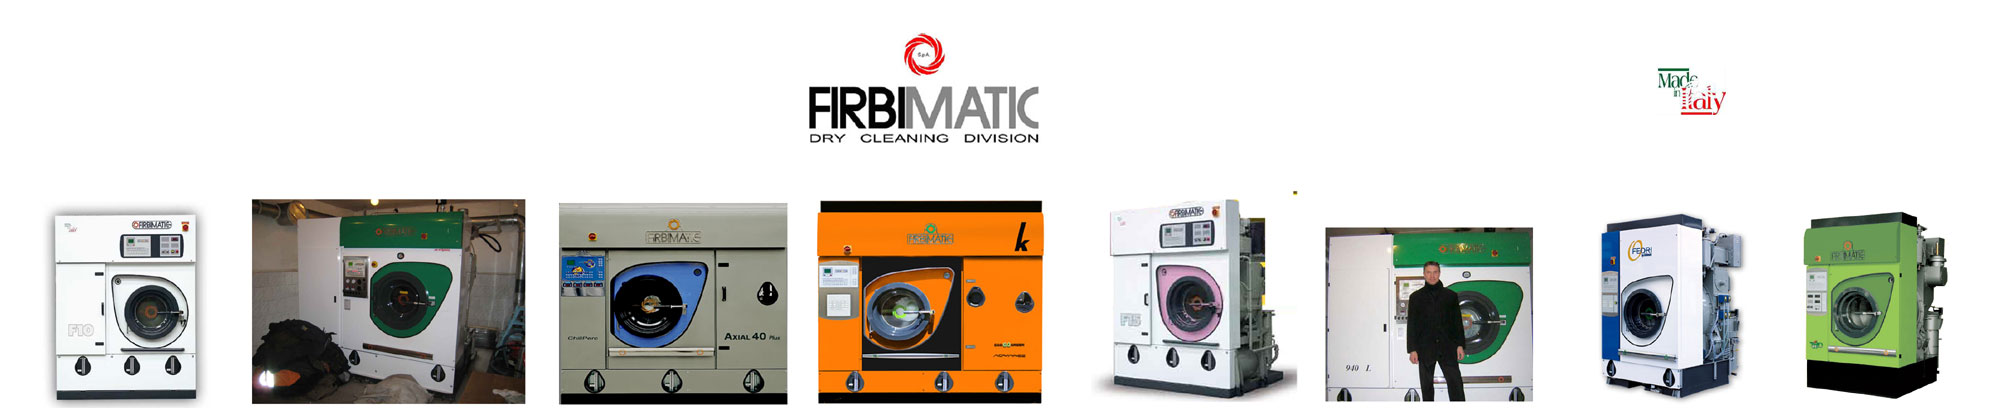 Firbimatic dry cleaning mashines